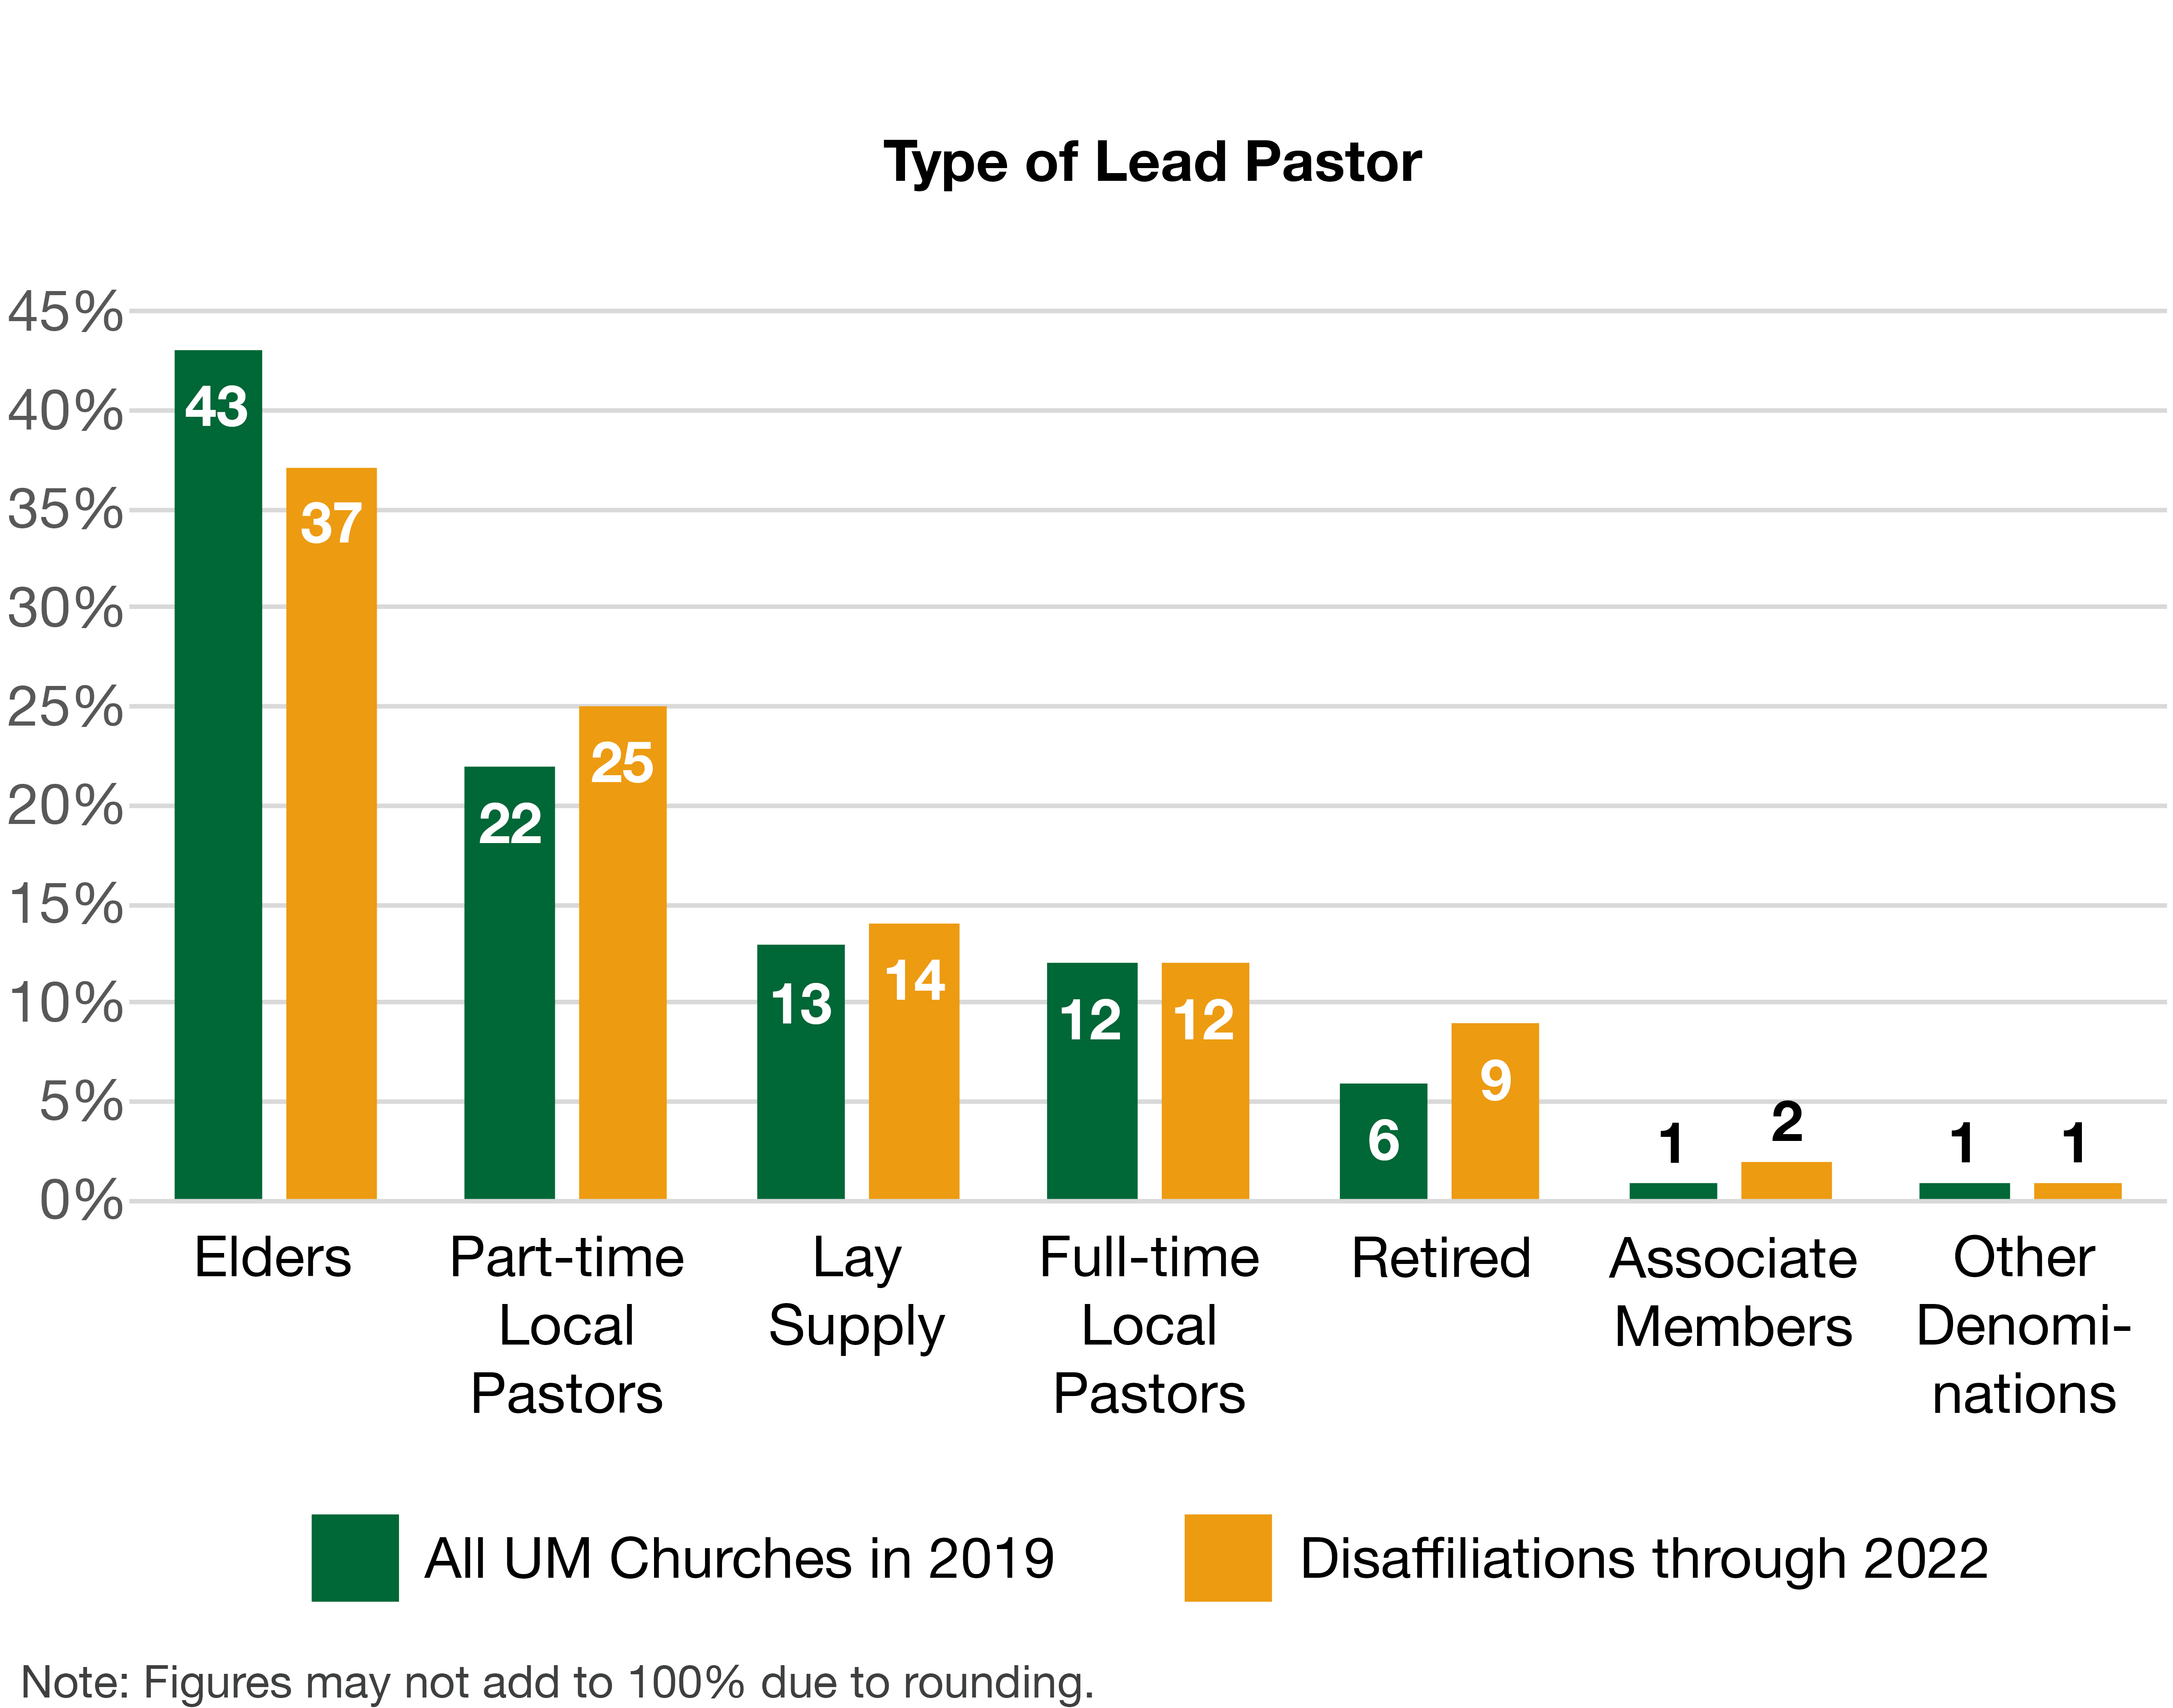 Type of Lead Pastor bar graph